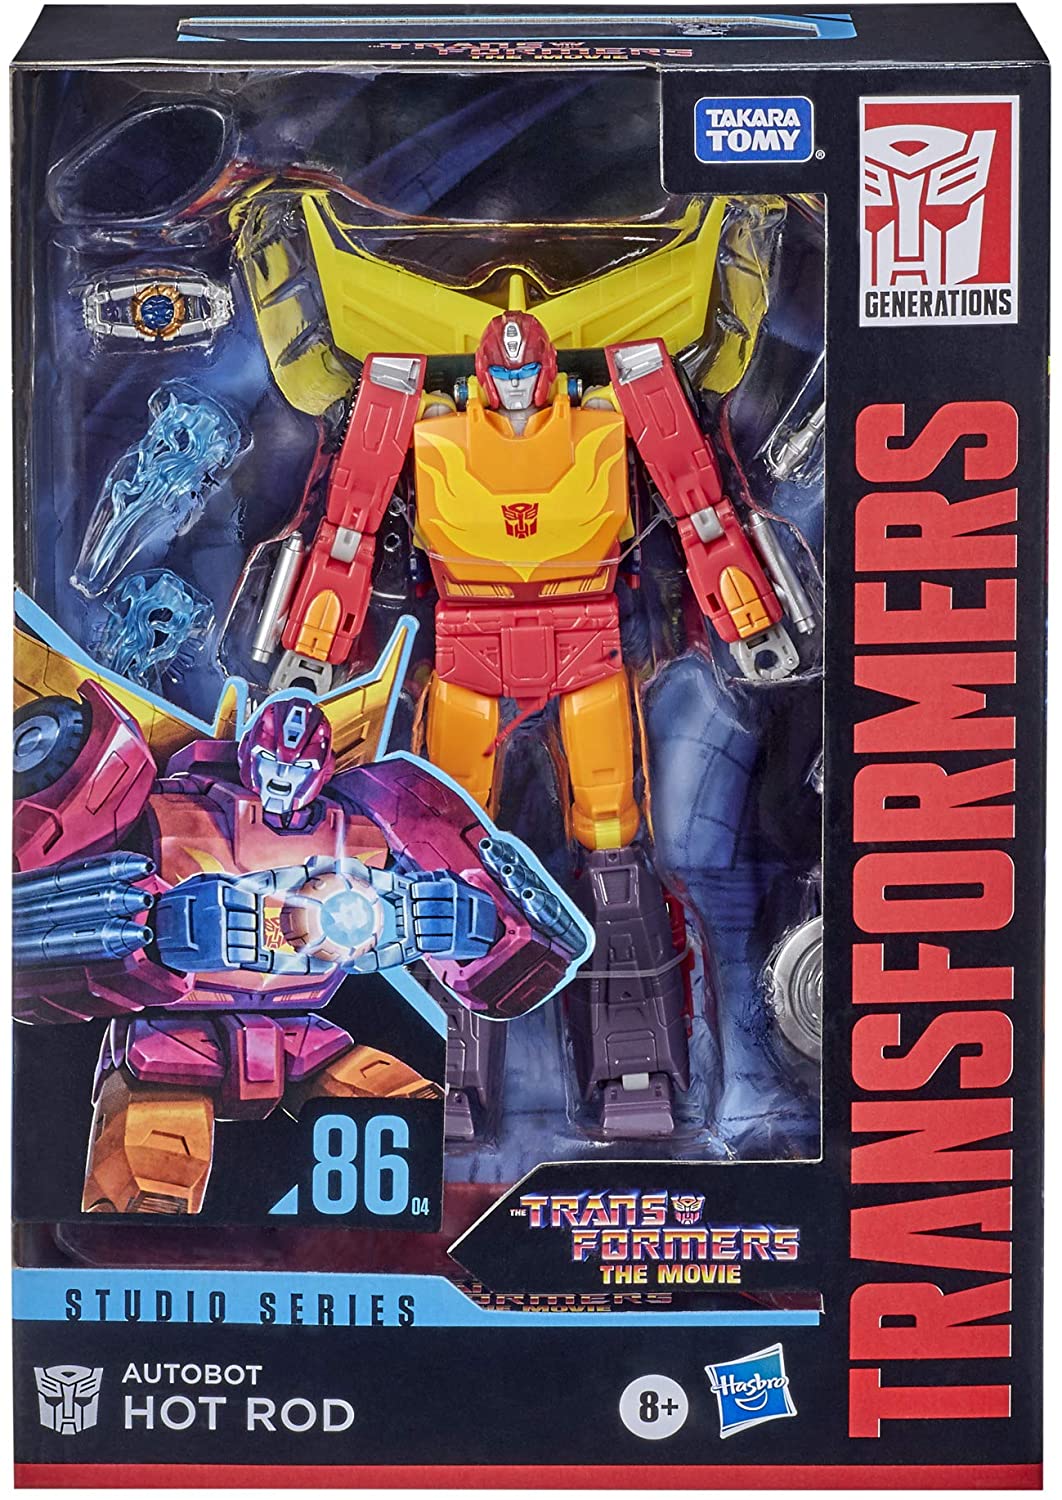 Transformers 86 Voyager Class The The Movie 1986 Autobot Hot Rod